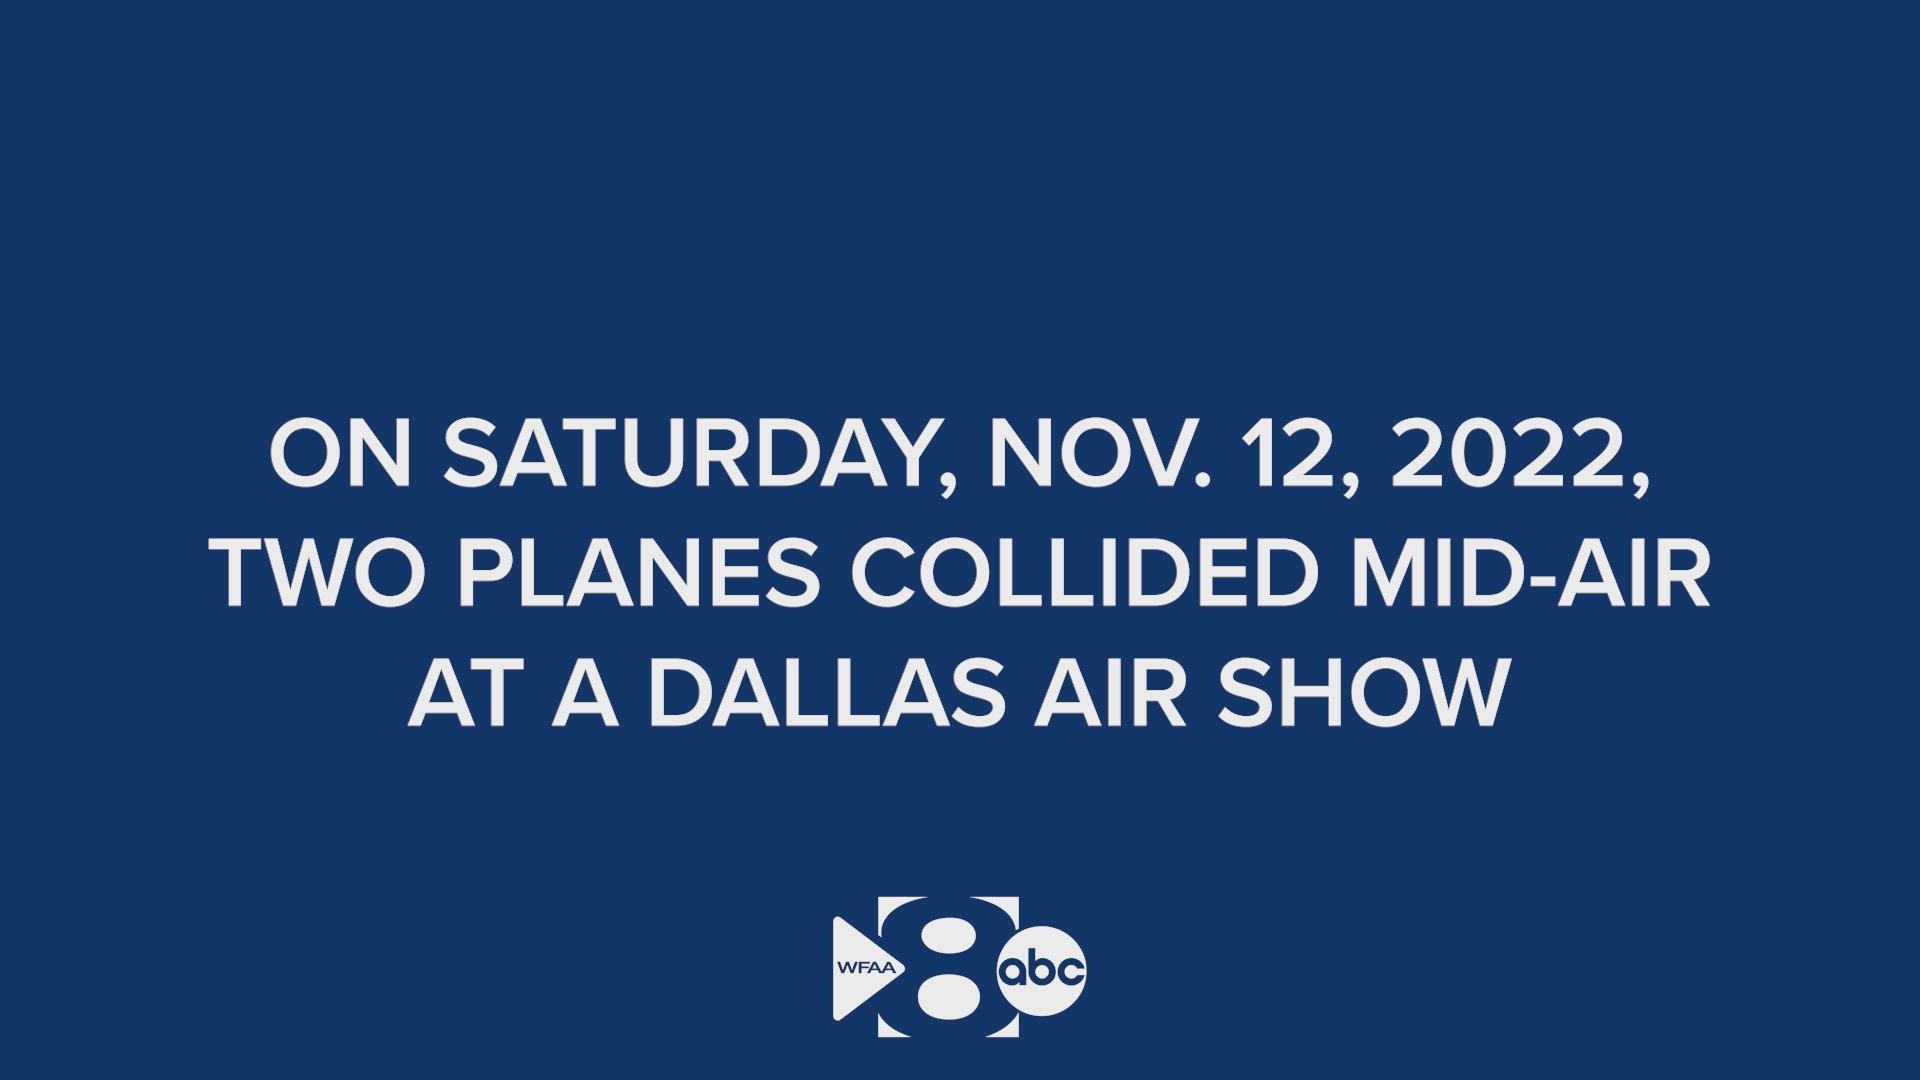 The NTSB has released new footage from its site investigation at the Dallas air show plane crash. Here's the full clip they released.